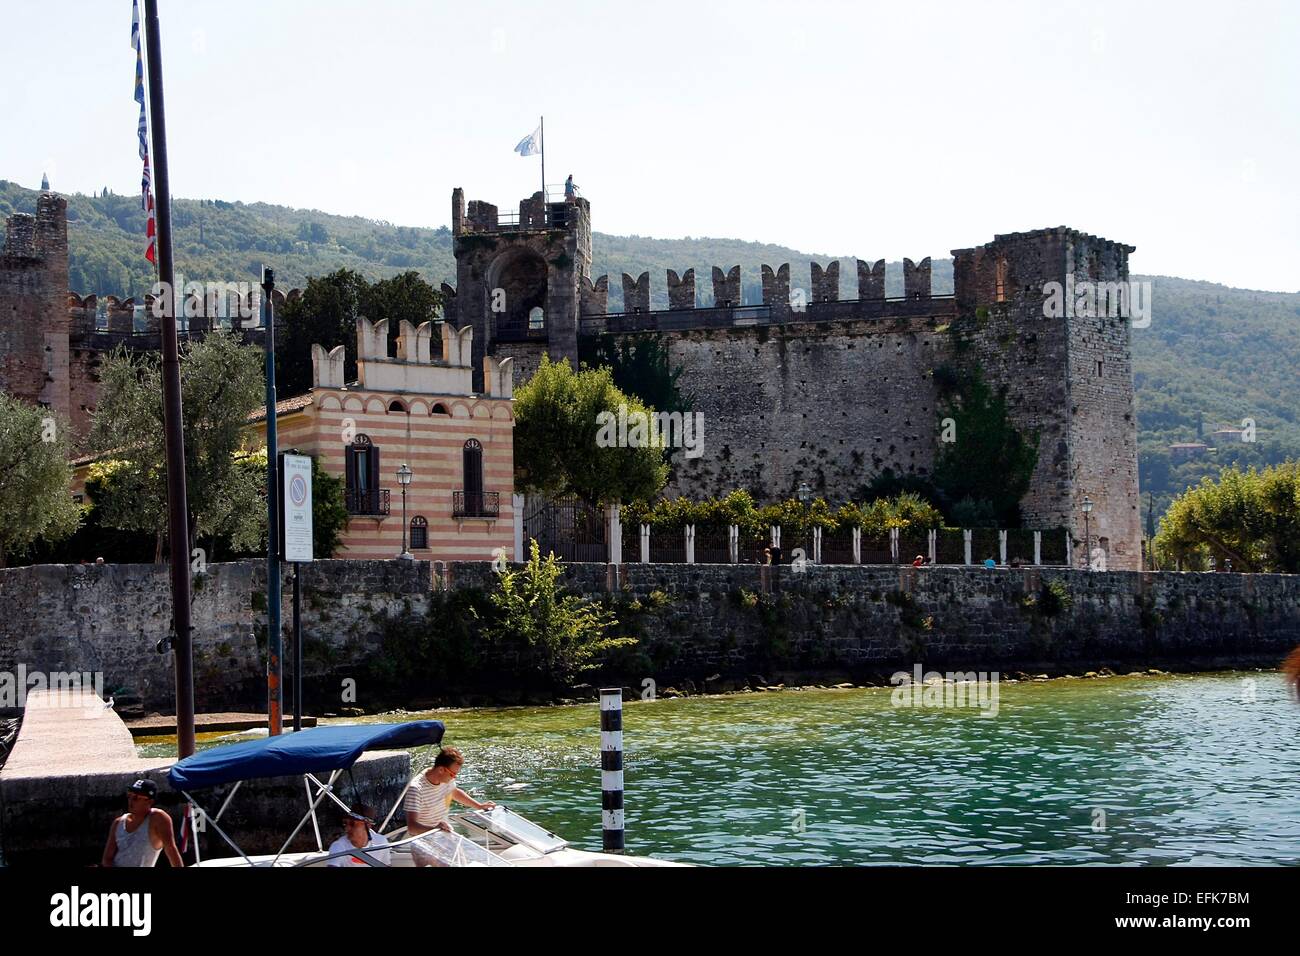 Scaliger Castle in Torri del Benaco was built in 1383 to protect the harbor. Torri del Benaco is a town on the eastern shore of Lake Garda. Photo: Klaus Nowottnick Date: August 27, 2014 Stock Photo